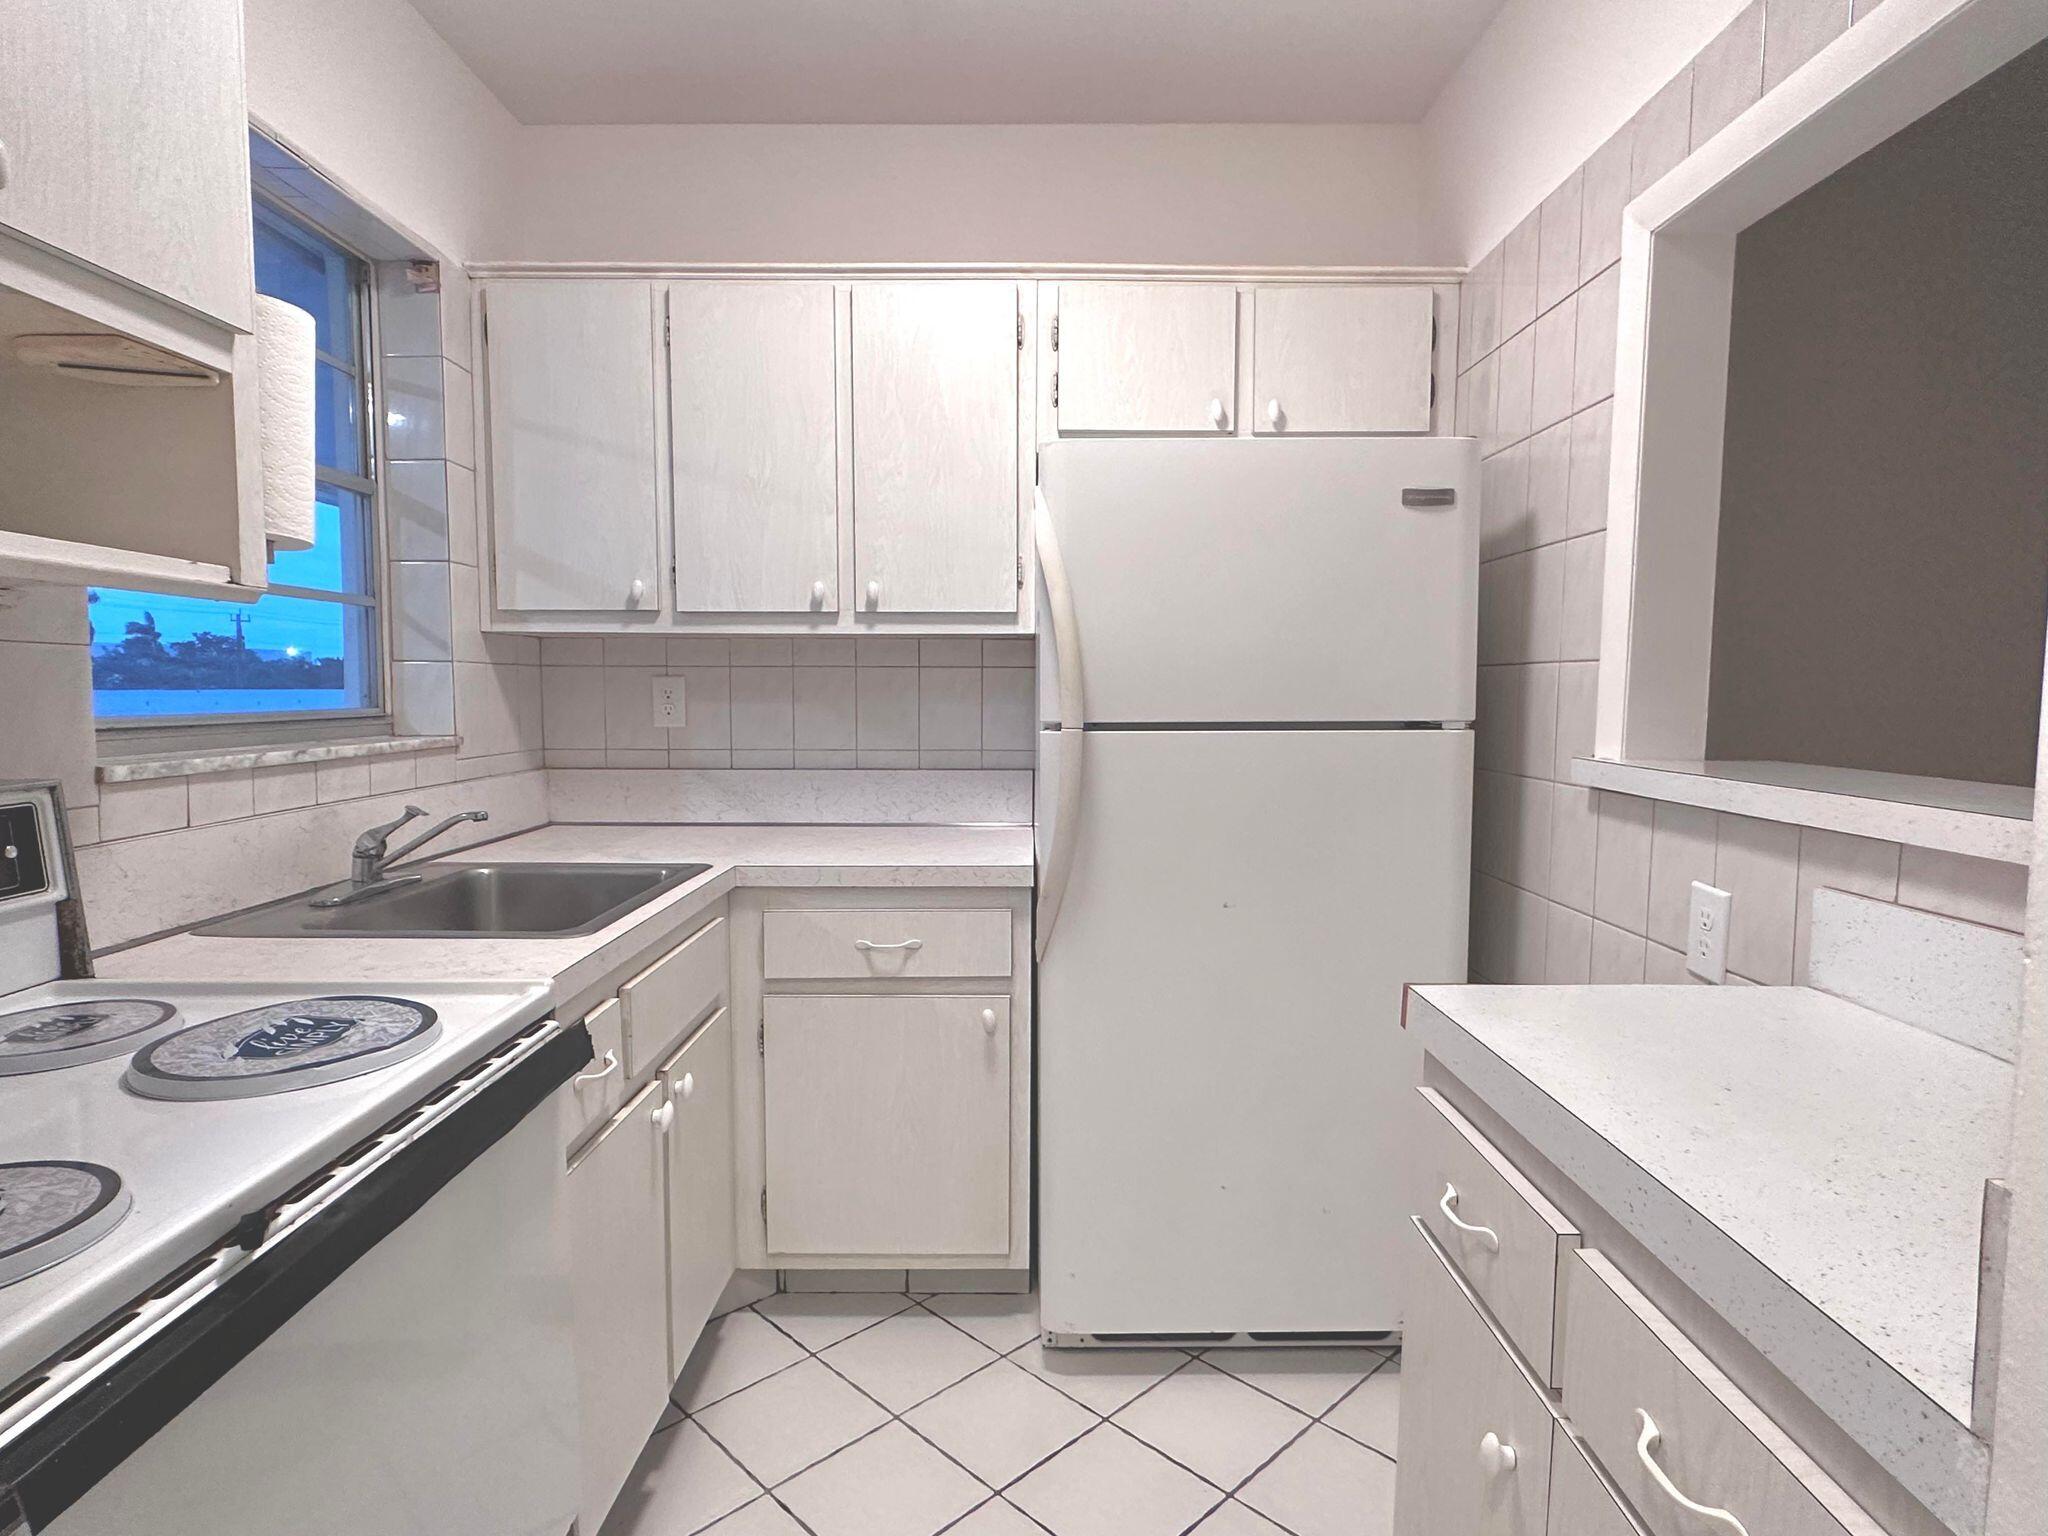 a white kitchen with sink refrigerator and cabinets